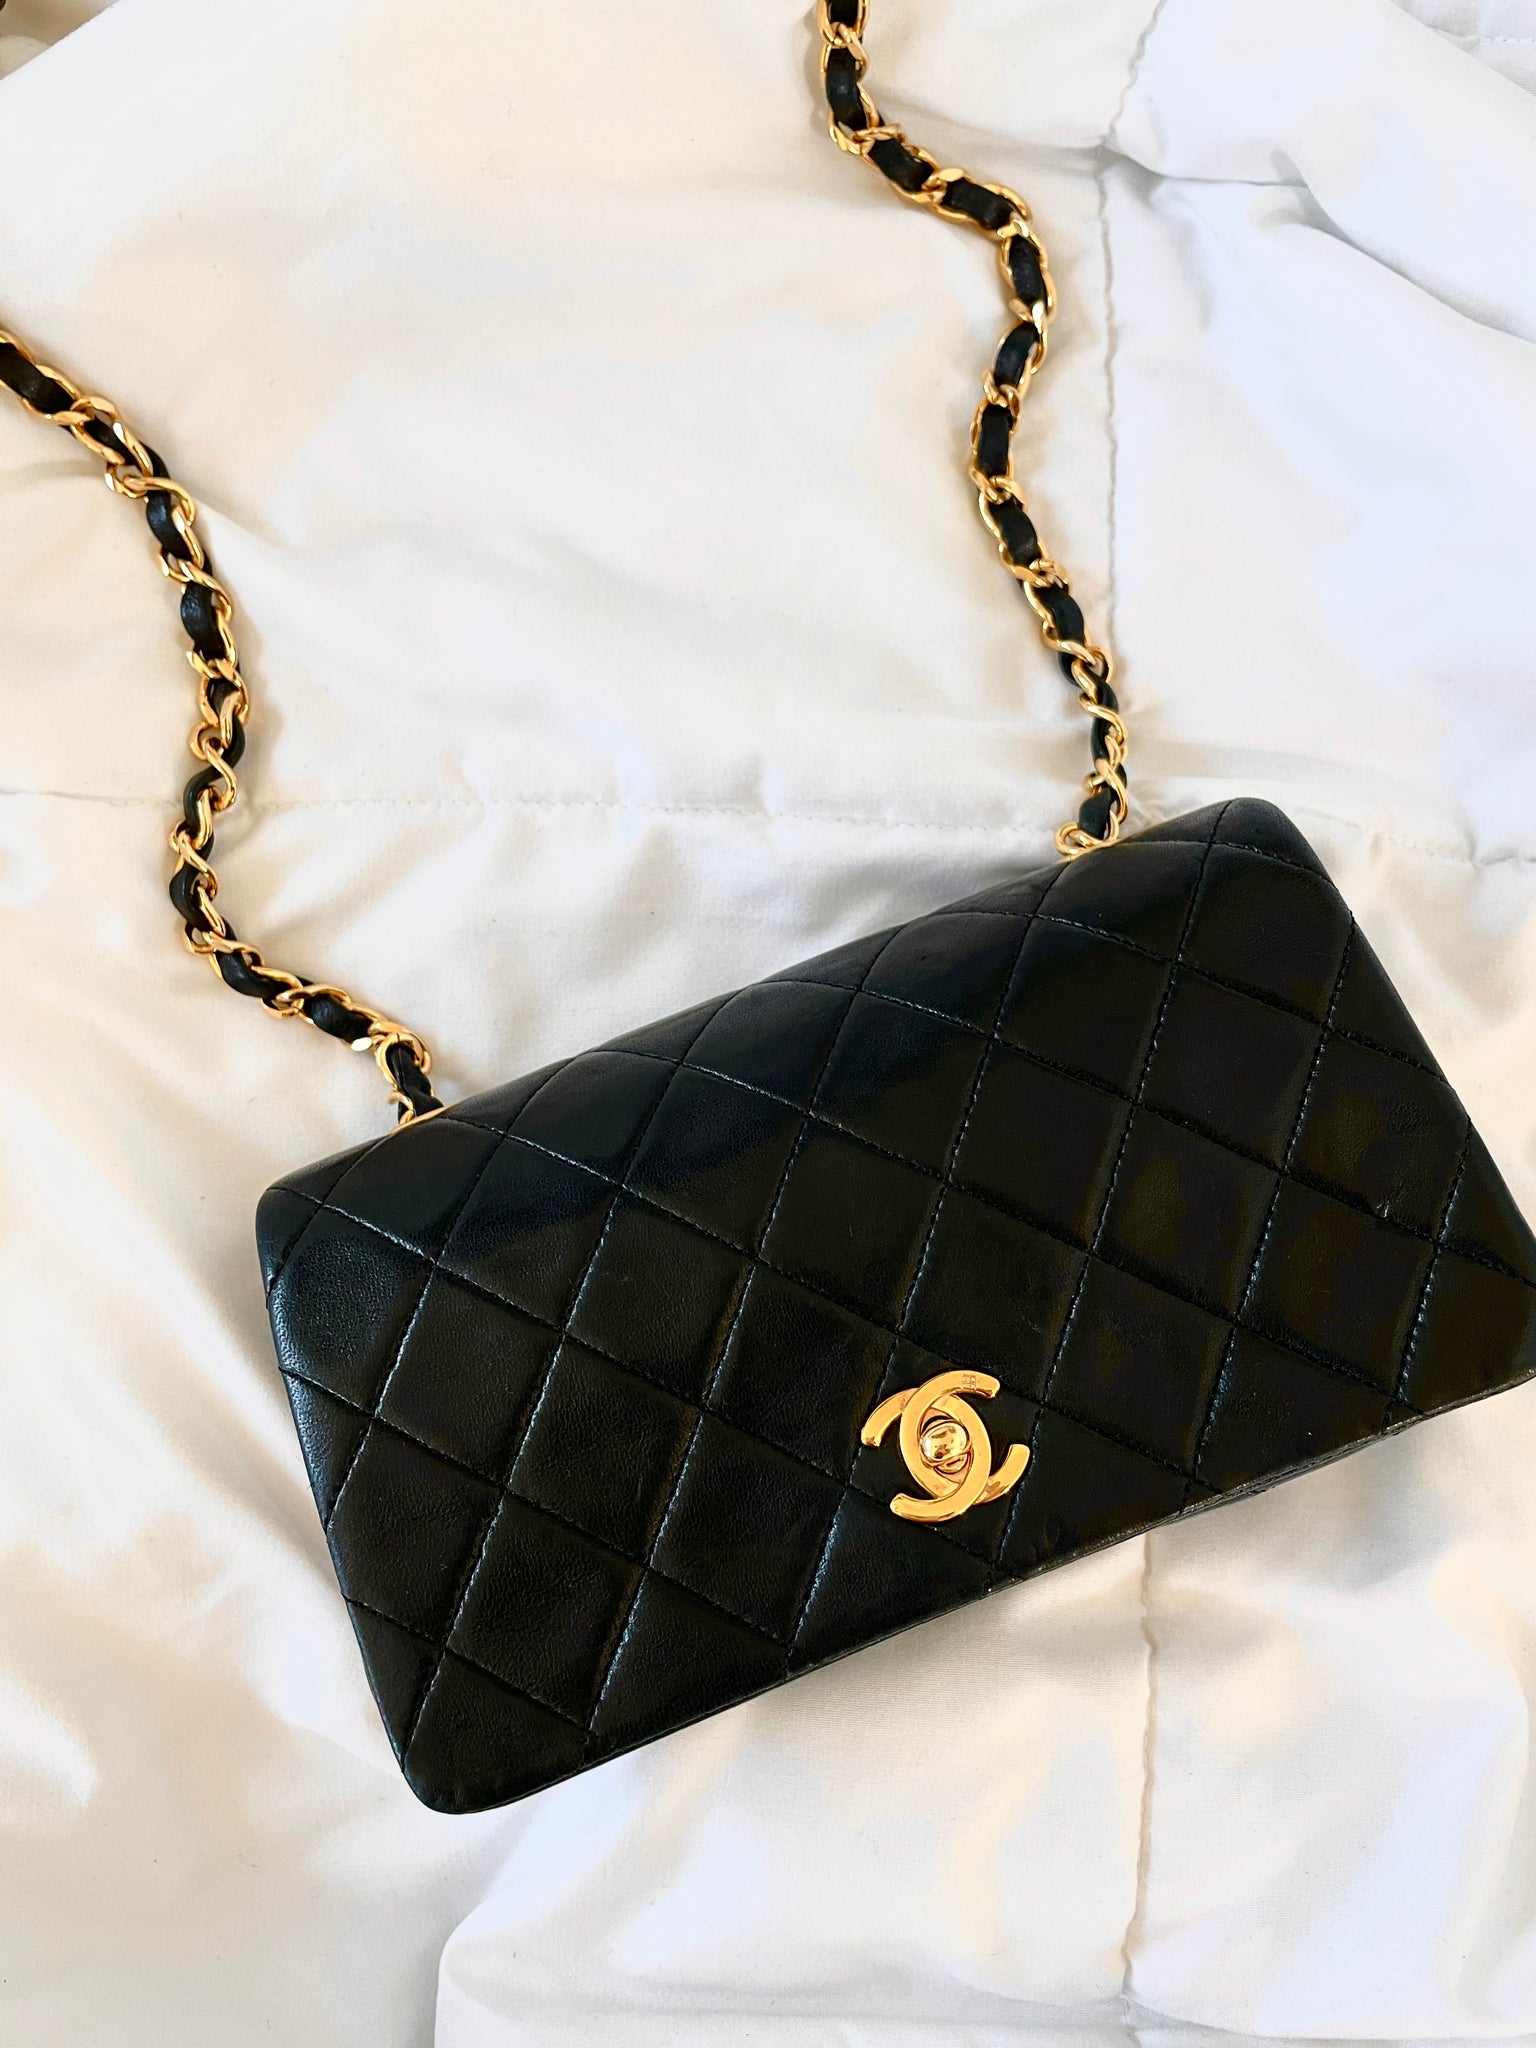 Snag the Latest CHANEL Turn Lock Mini Bags & Handbags for Women with Fast  and Free Shipping. Authenticity Guaranteed on Designer Handbags $500+ at  .